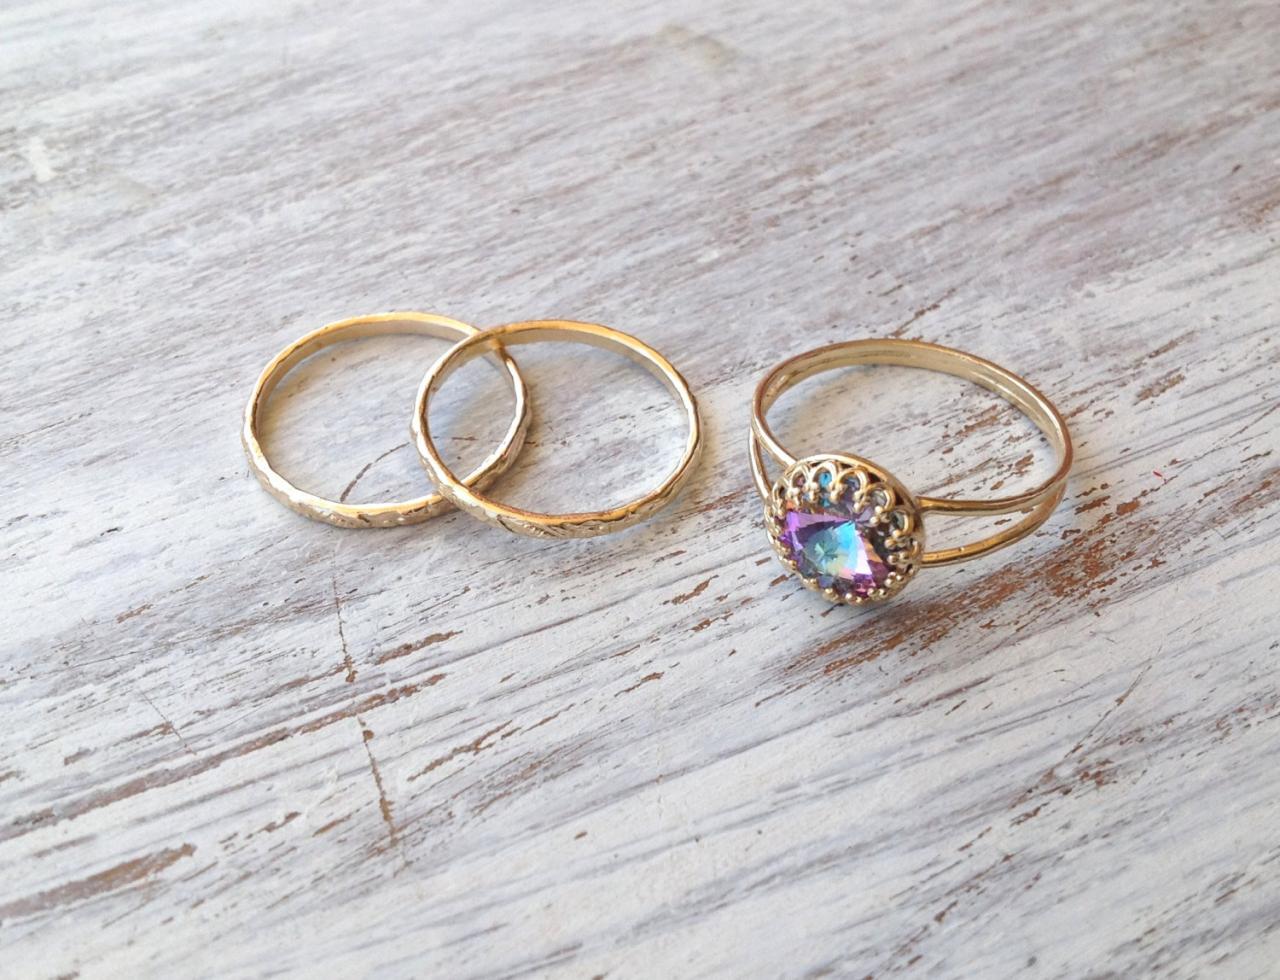 SET OF 3- Gold ring, stacking ring, vintage ring, stackble ring, crystal ring, stackble gold ring, light purple, any size